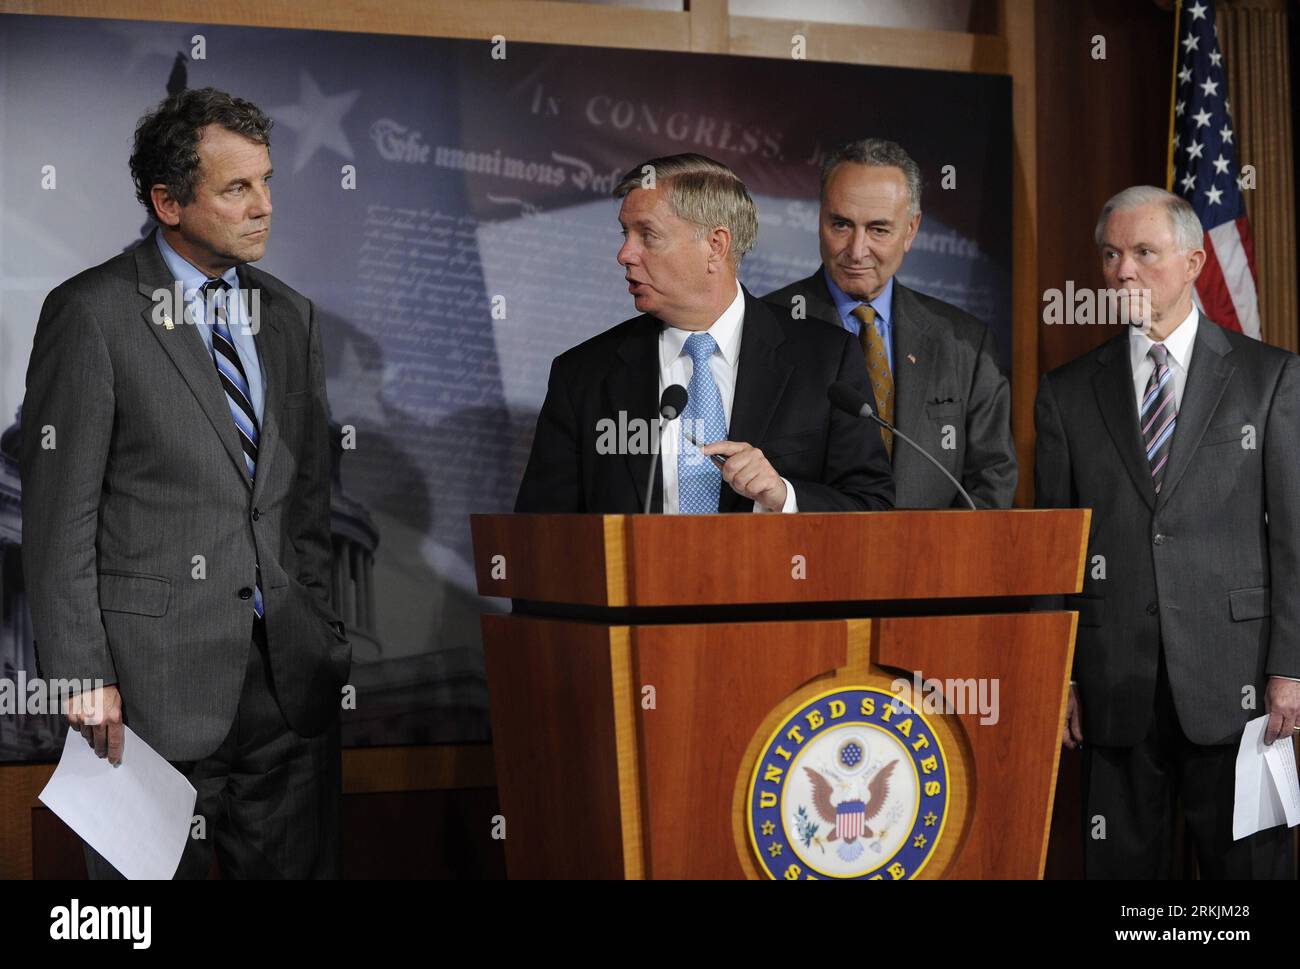 Bildnummer: 56143854  Datum: 03.10.2011  Copyright: imago/Xinhua (111004) -- WASHINGTON, Oct. 4, 2011 (Xinhua) -- (L-R) U.S. Senators Sherrod Brown, Lindsey Graham, Chuck Schumer and Jeff Sessions attend a press conference in Washington D.C., on Oct. 3, 2011. The U.S. Senate voted Monday to allow a debate on a controversial bill on so-called currency manipulation by China amid strong opposition from China and U.S. business groups. (Xinhua/Zhang Jun) (nxl) US-WASHINGTON-SENATE-EXCHANGE RATE-PRESS CONFERENCE PUBLICATIONxNOTxINxCHN People Politik xjh x0x premiumd 2011 quer      56143854 Date 03 1 Stock Photo